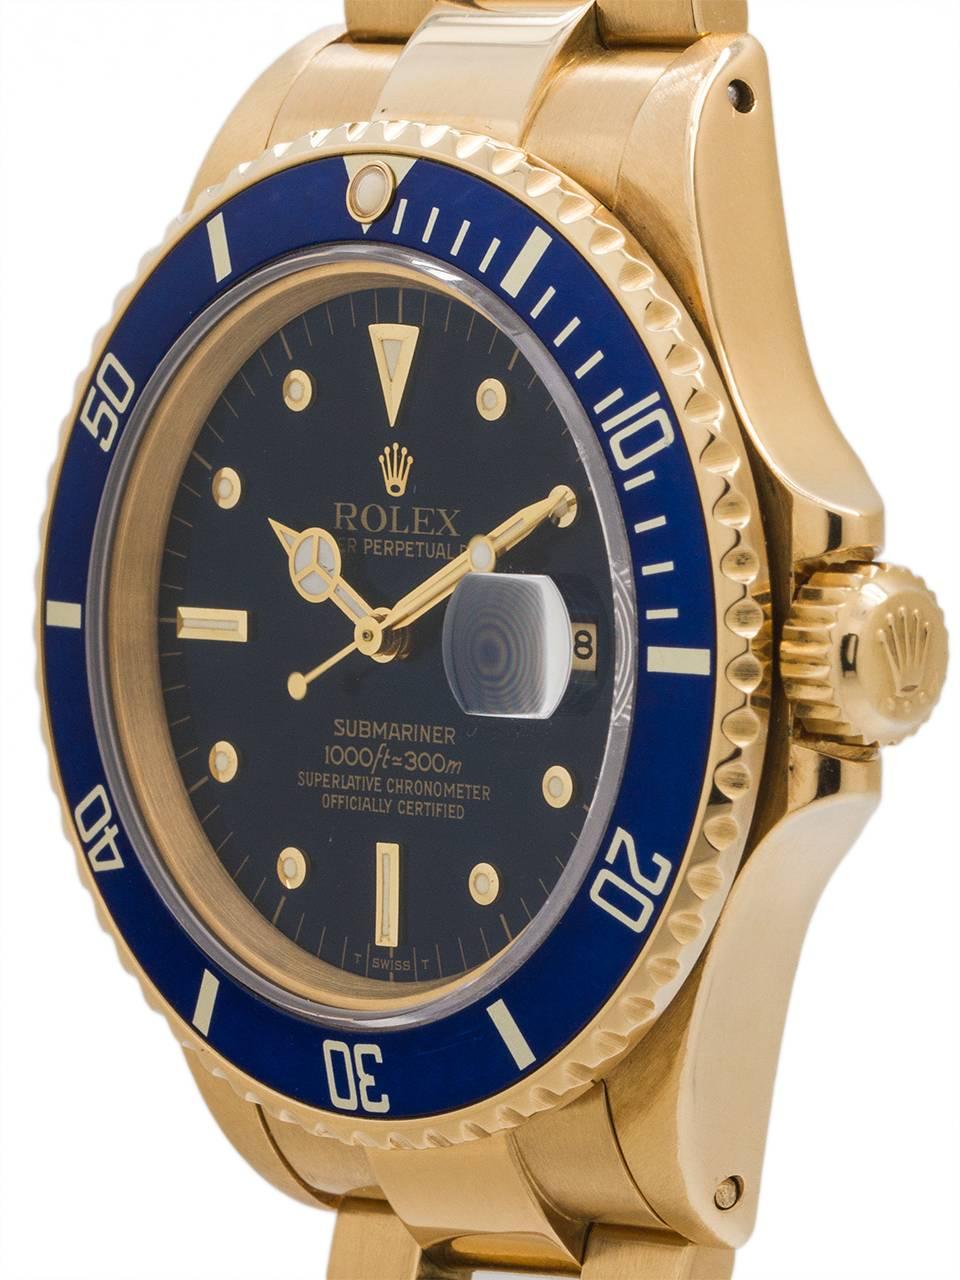 Exceptional condition example Rolex 18K YG Submariner ref 16808, serial #R4, circa 1987. Exceptional condition example of this classic early sapphire crystal model. With beefy lugs case, sapphire crystal, original intense blue original glossy blue